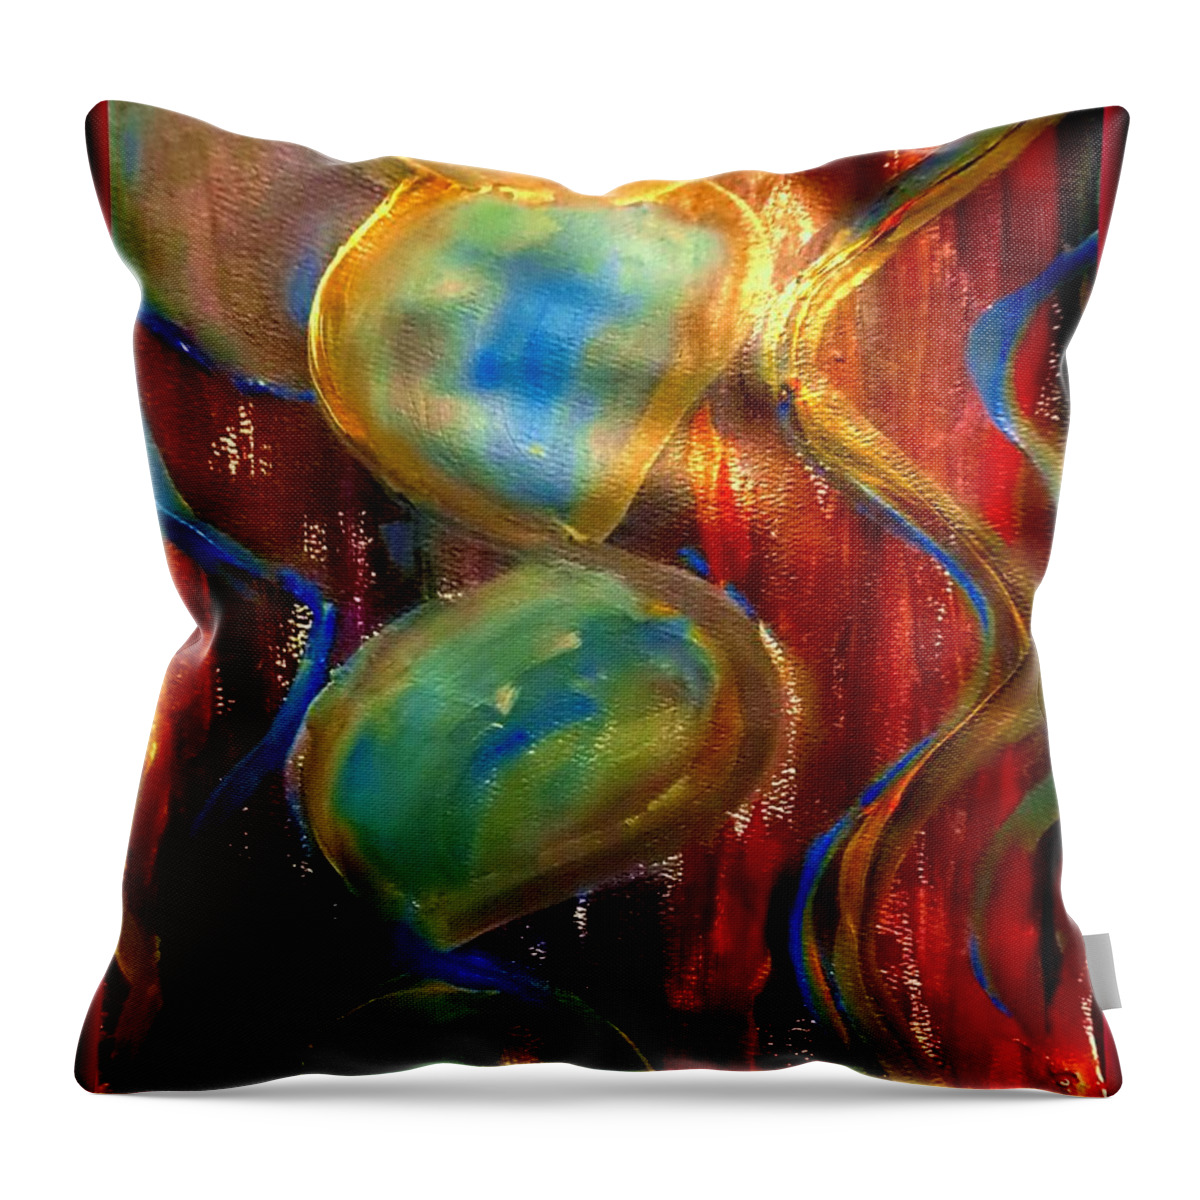 Floating Bubbles Streaming Down In Succession Of One Another Blues Greens Golds Reds And Oranges Hint Of Purple Swirling Lines Floating Down Abstract And Organic Luminous Abstract Psychedellic Colors Acrylic Painting Throw Pillow featuring the mixed media So Organic by Kimberlee Baxter